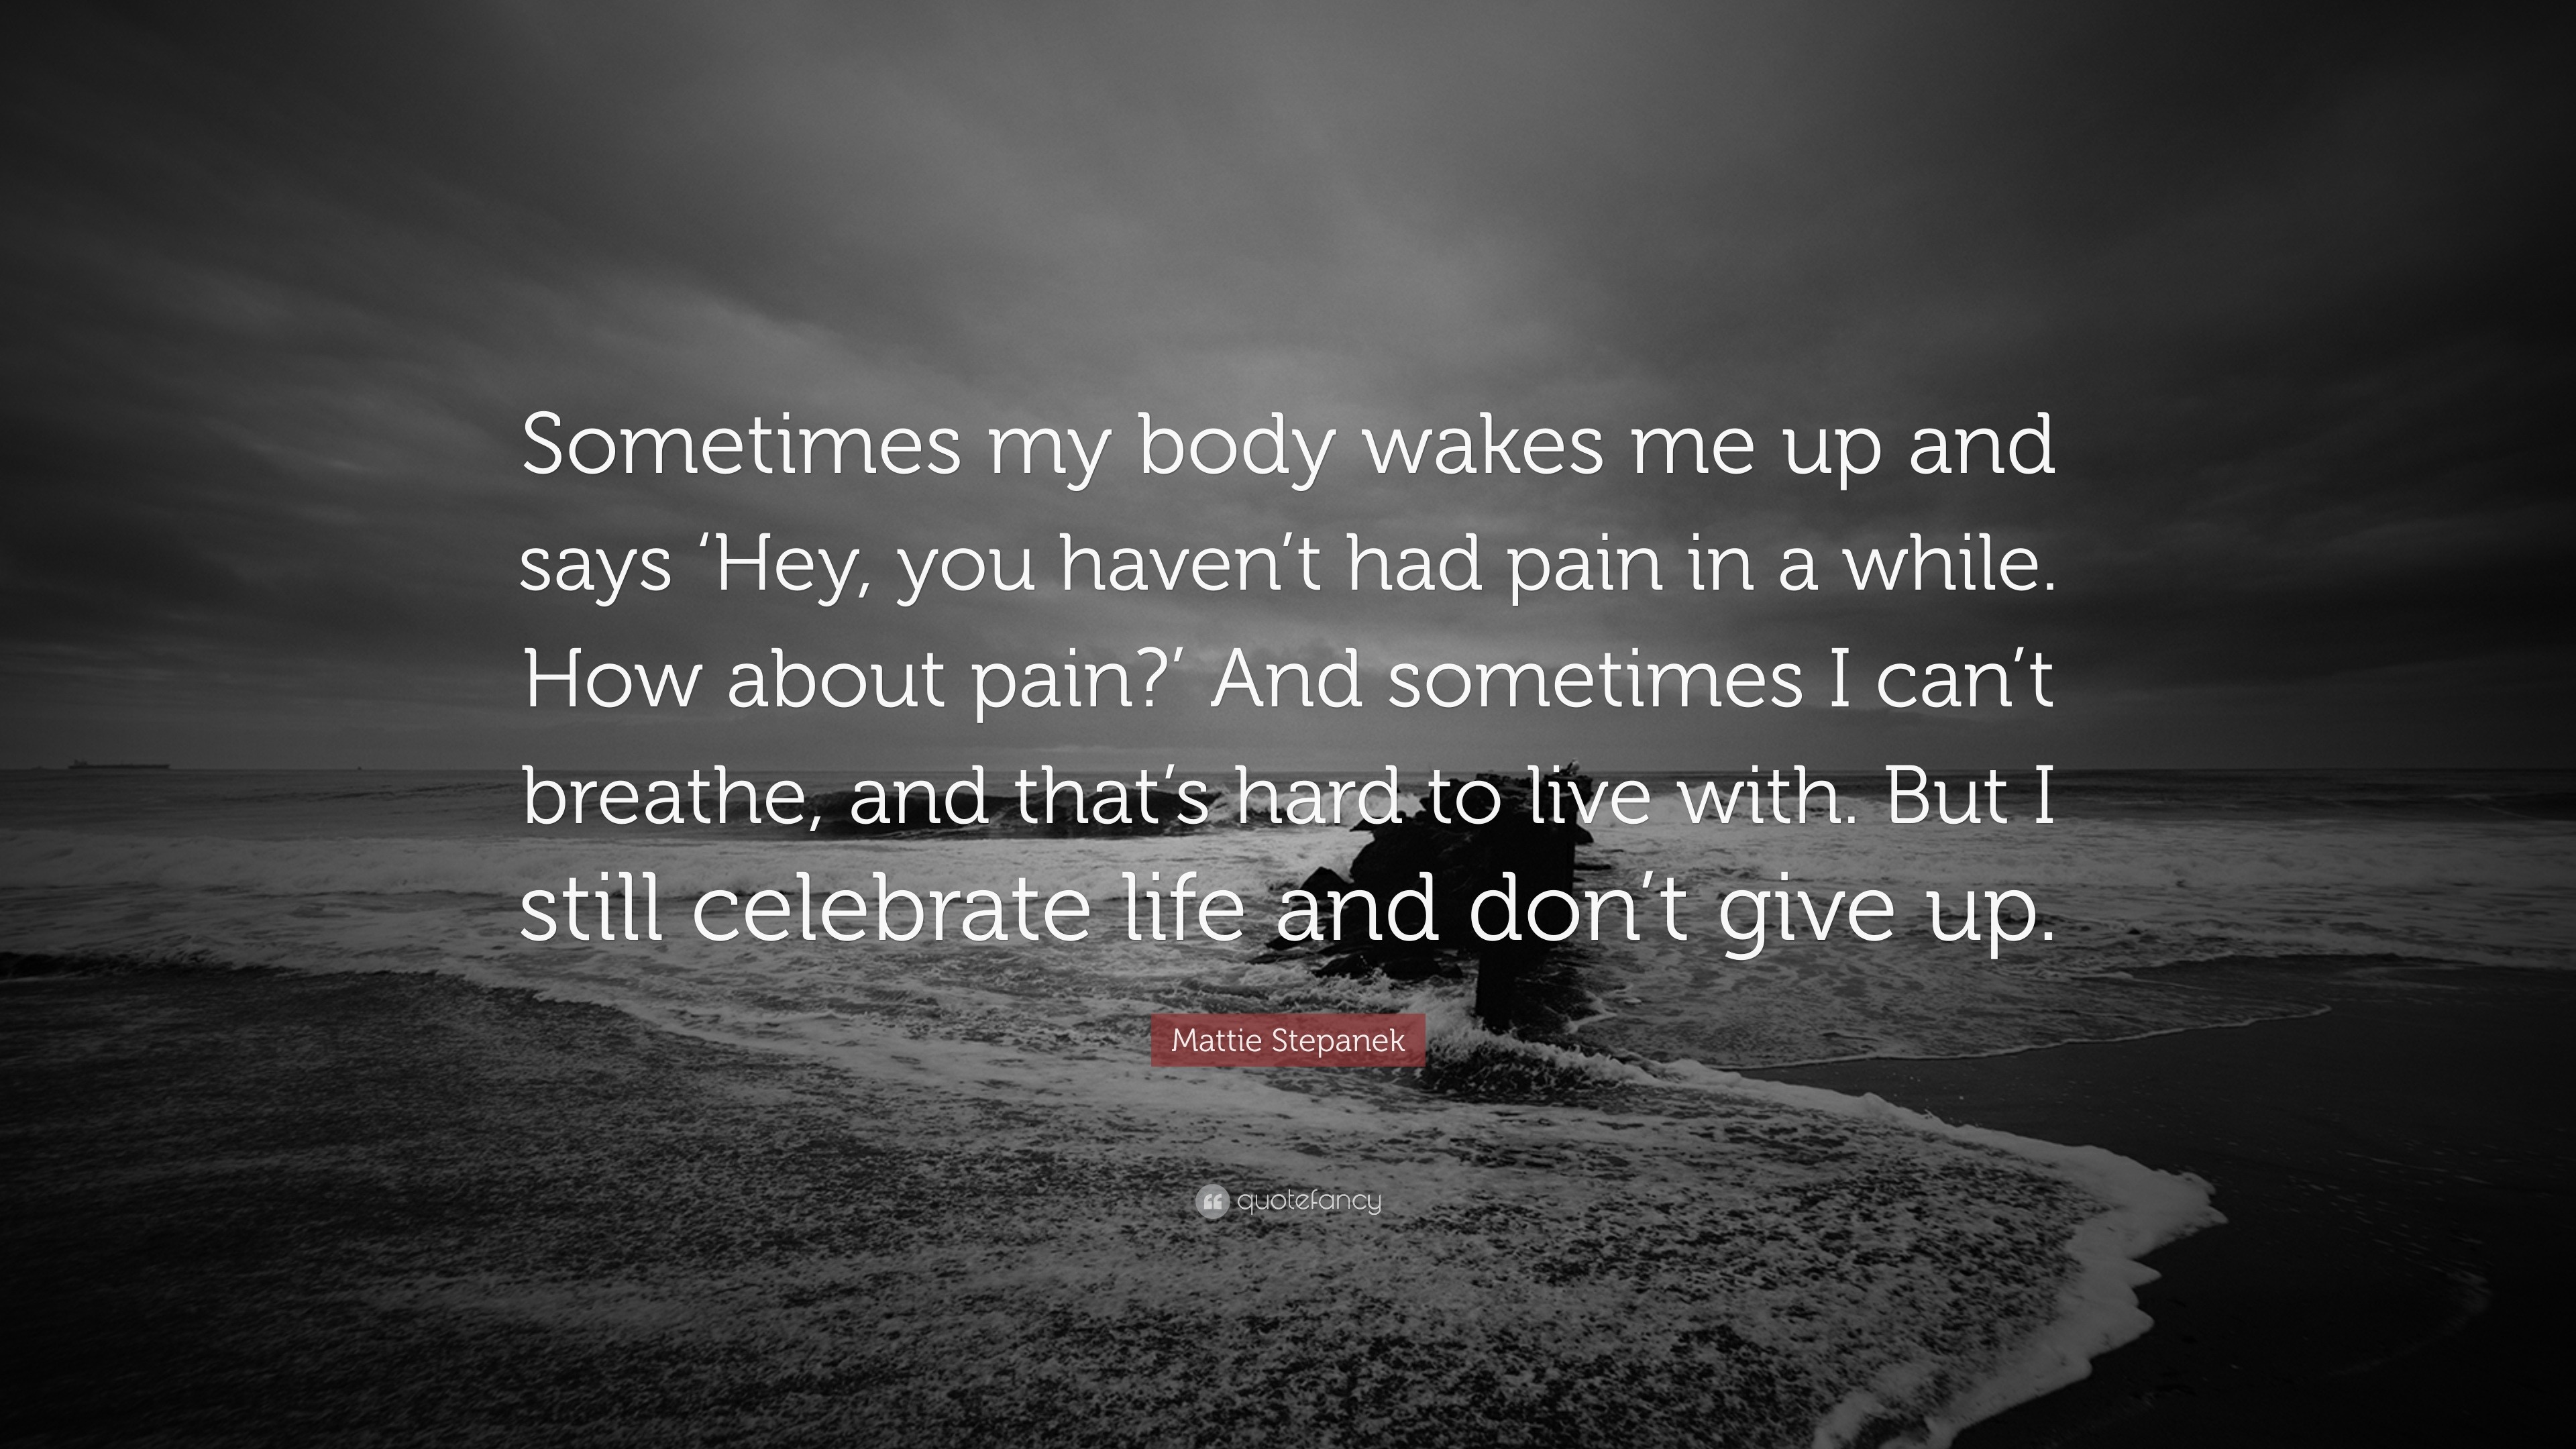 Mattie Stepanek Quote: “Sometimes my body wakes me up and says ‘Hey ...